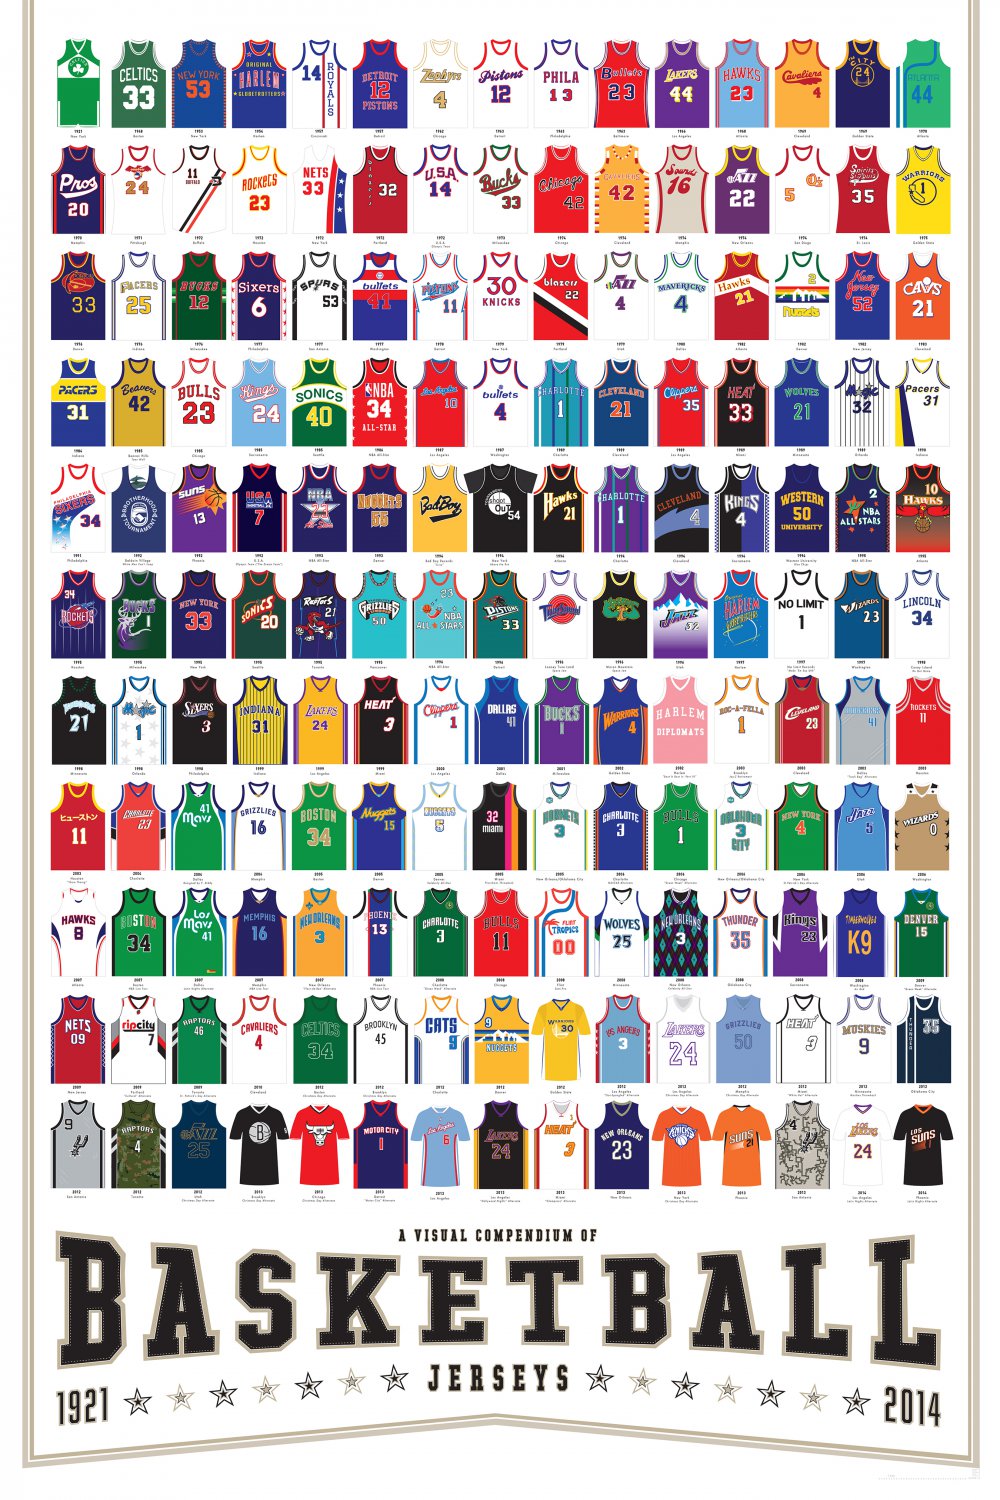 A Visual Compendium of Basketball Jerseys Chart  13"x19" (32cm/49cm) Polyester Fabric Poster